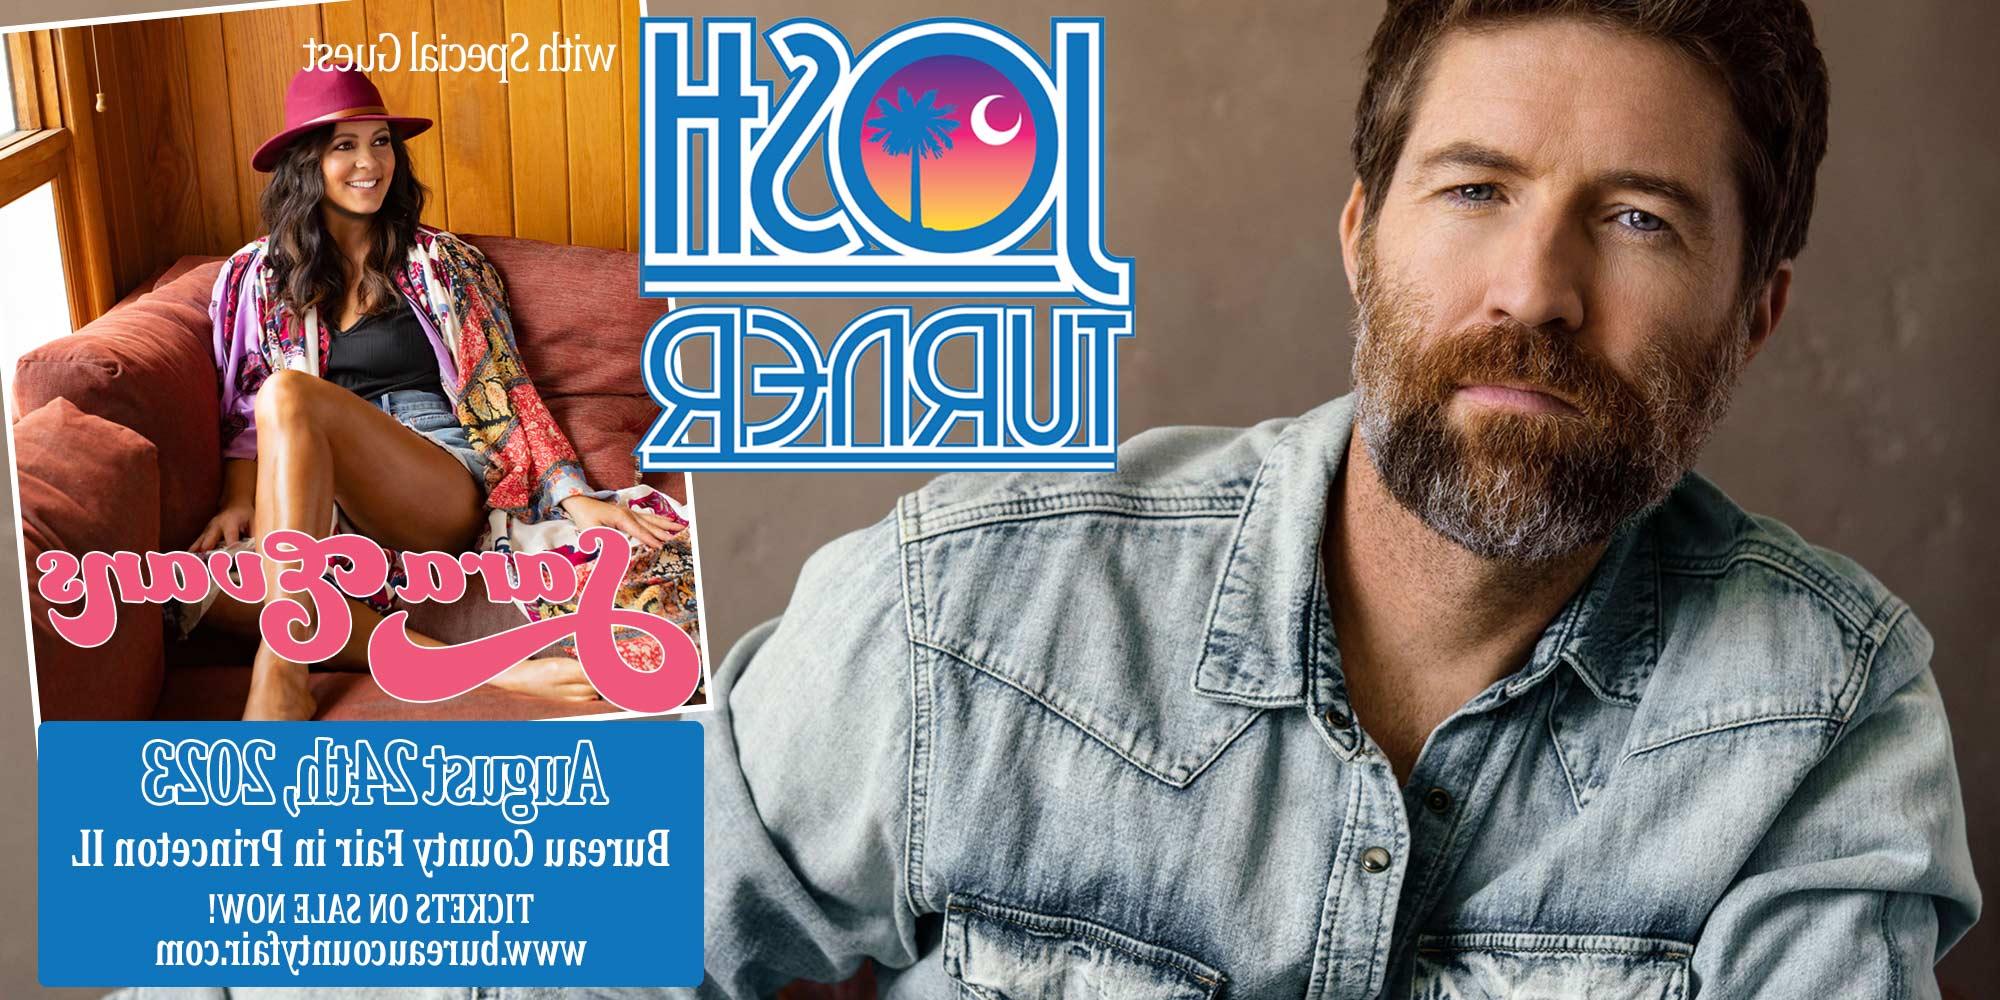 The Bureau County Fair Proudly Presents Josh Turner with Special Guest Sara Evans in Concert Thursday, 8月24rd, 2023!